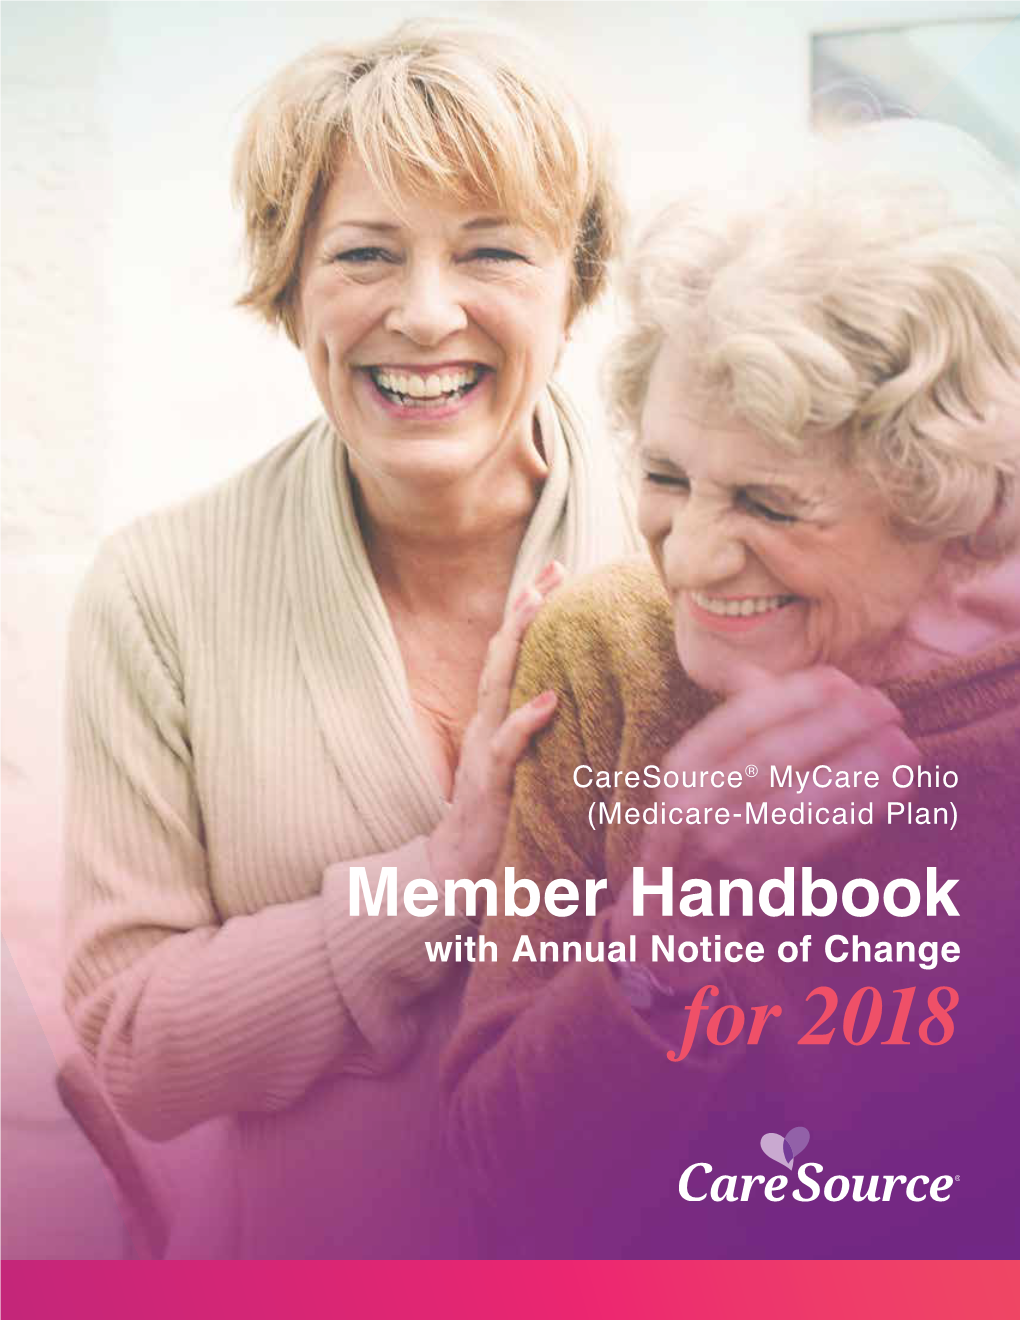 Member Handbook with Annual Notice of Change for 2018 Caresource Mycare Ohio MEMBER HANDBOOK Annual Notice of Changes for 2018